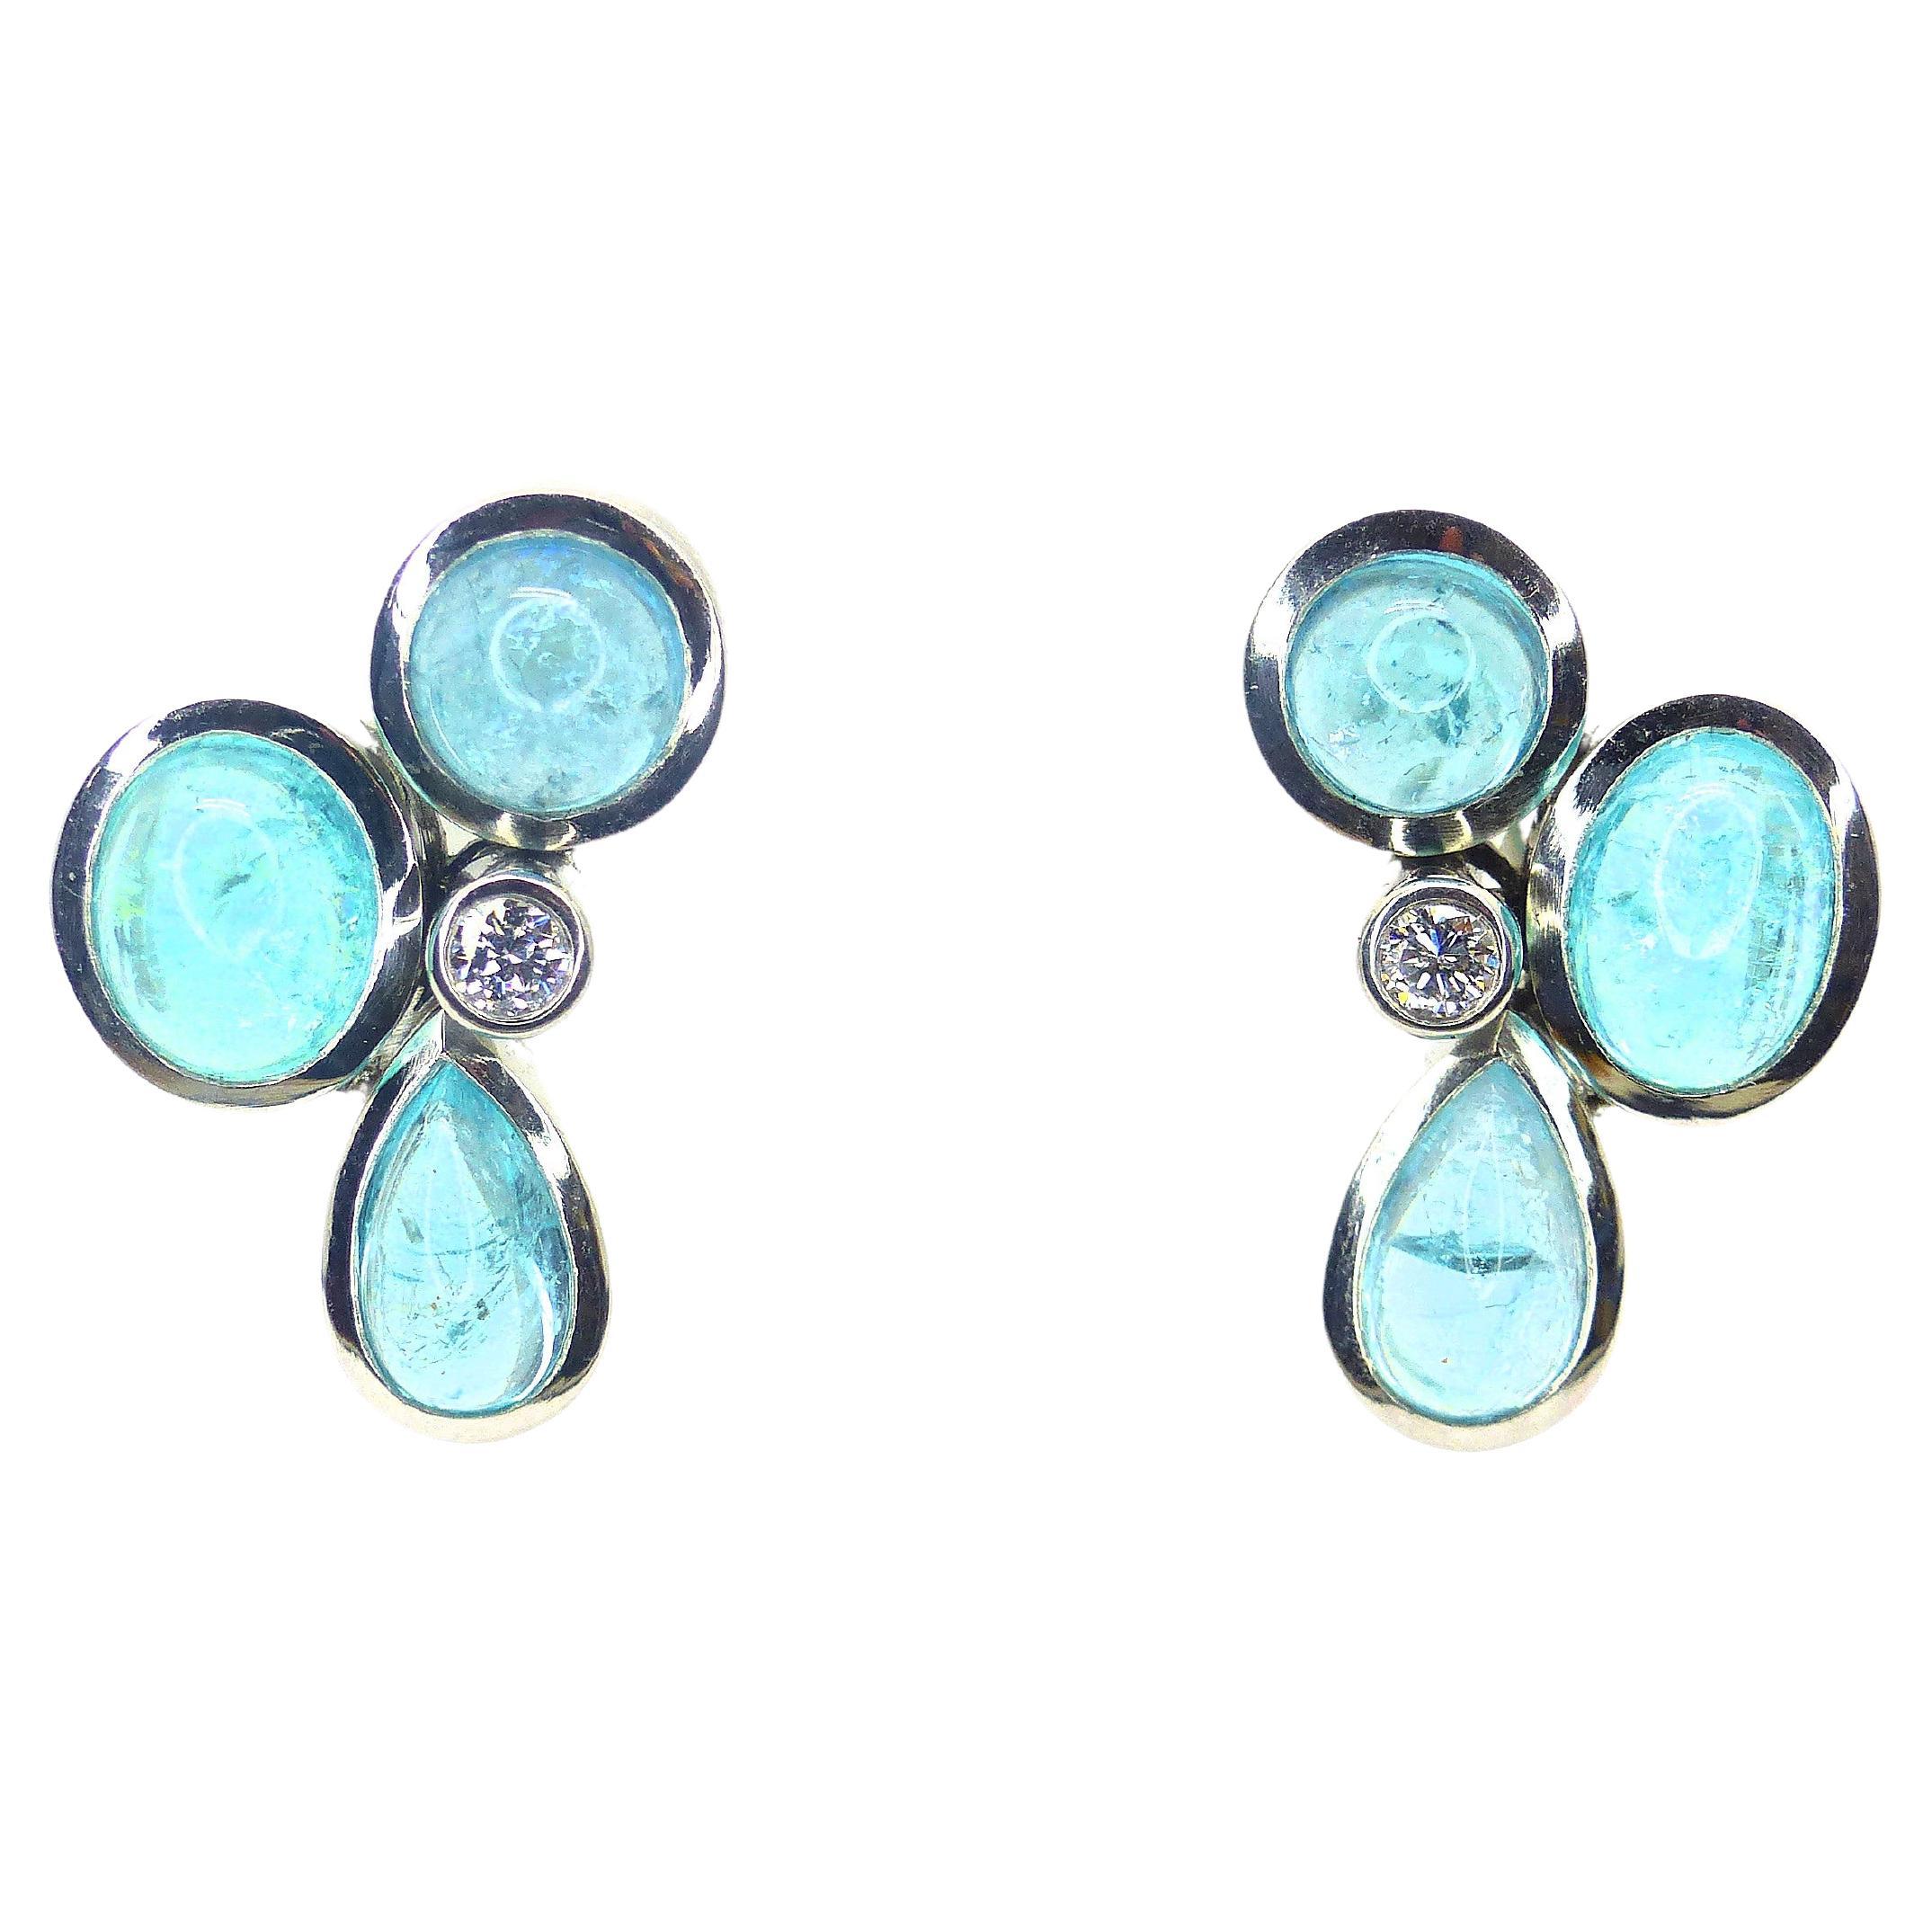 Earrings in Platinum with 6 Paraiba Tourmaline Cabouchons and 2 Diamonds For Sale